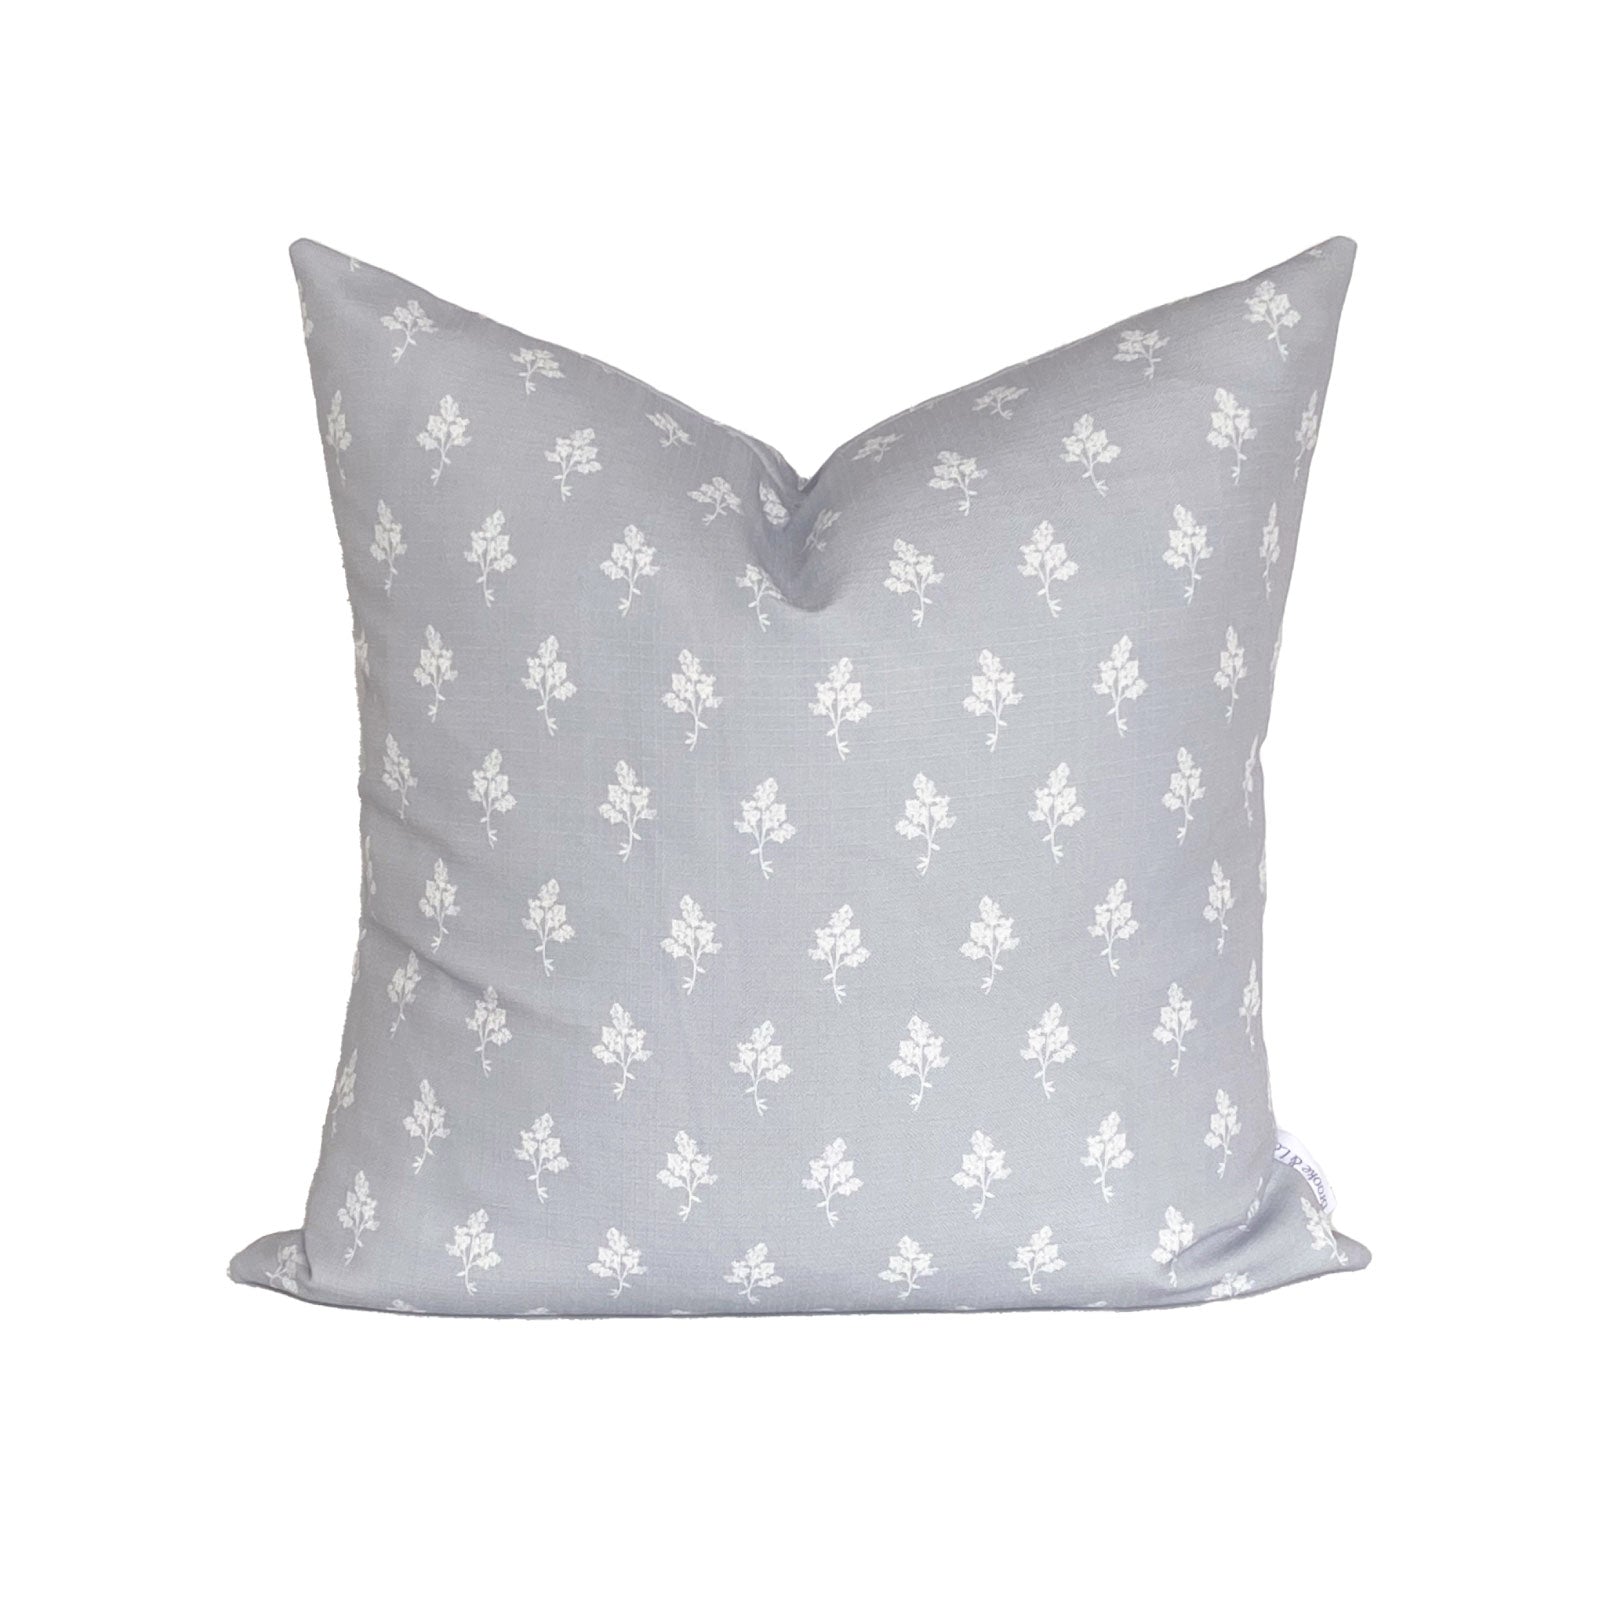 Hannah Floral Pillow in Stone Grey